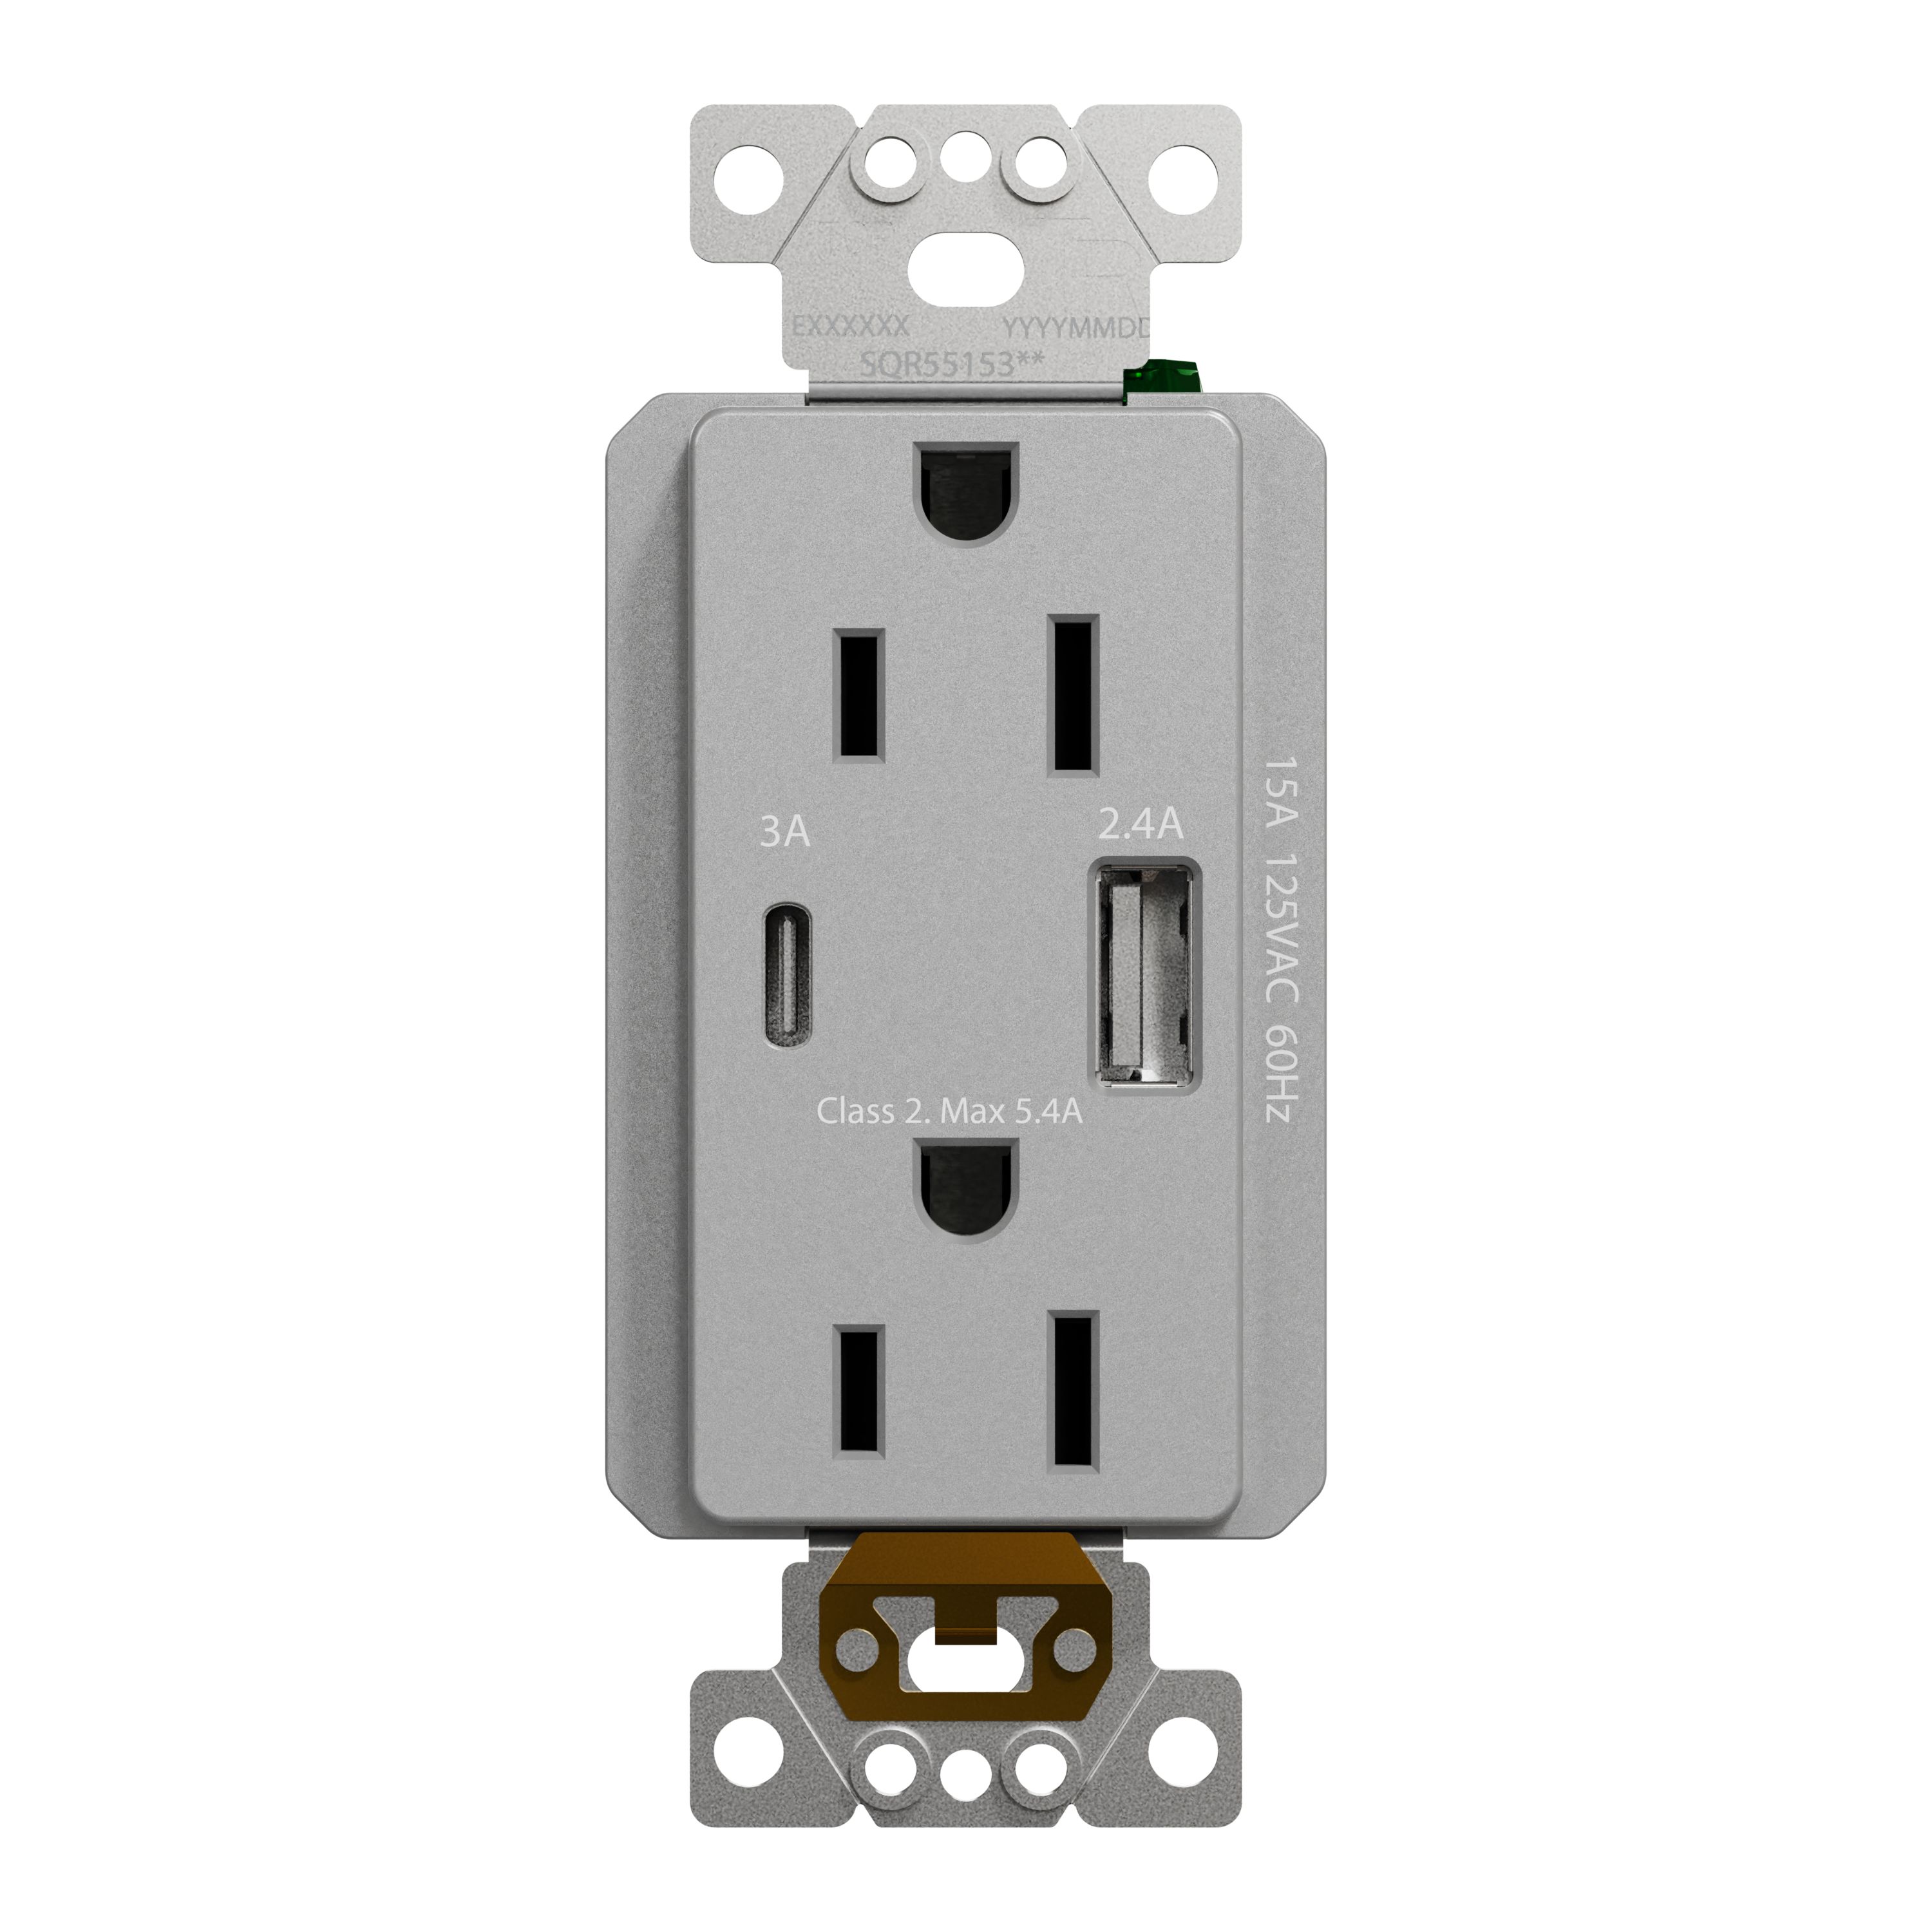 Basics Smart In-Wall Outlet with 2 Individually Controlled Outlets,  Tamper Resistant, 2.4 GHz Wi-Fi, Works with Alexa Only, 4.57 x 2.80 x 1.85